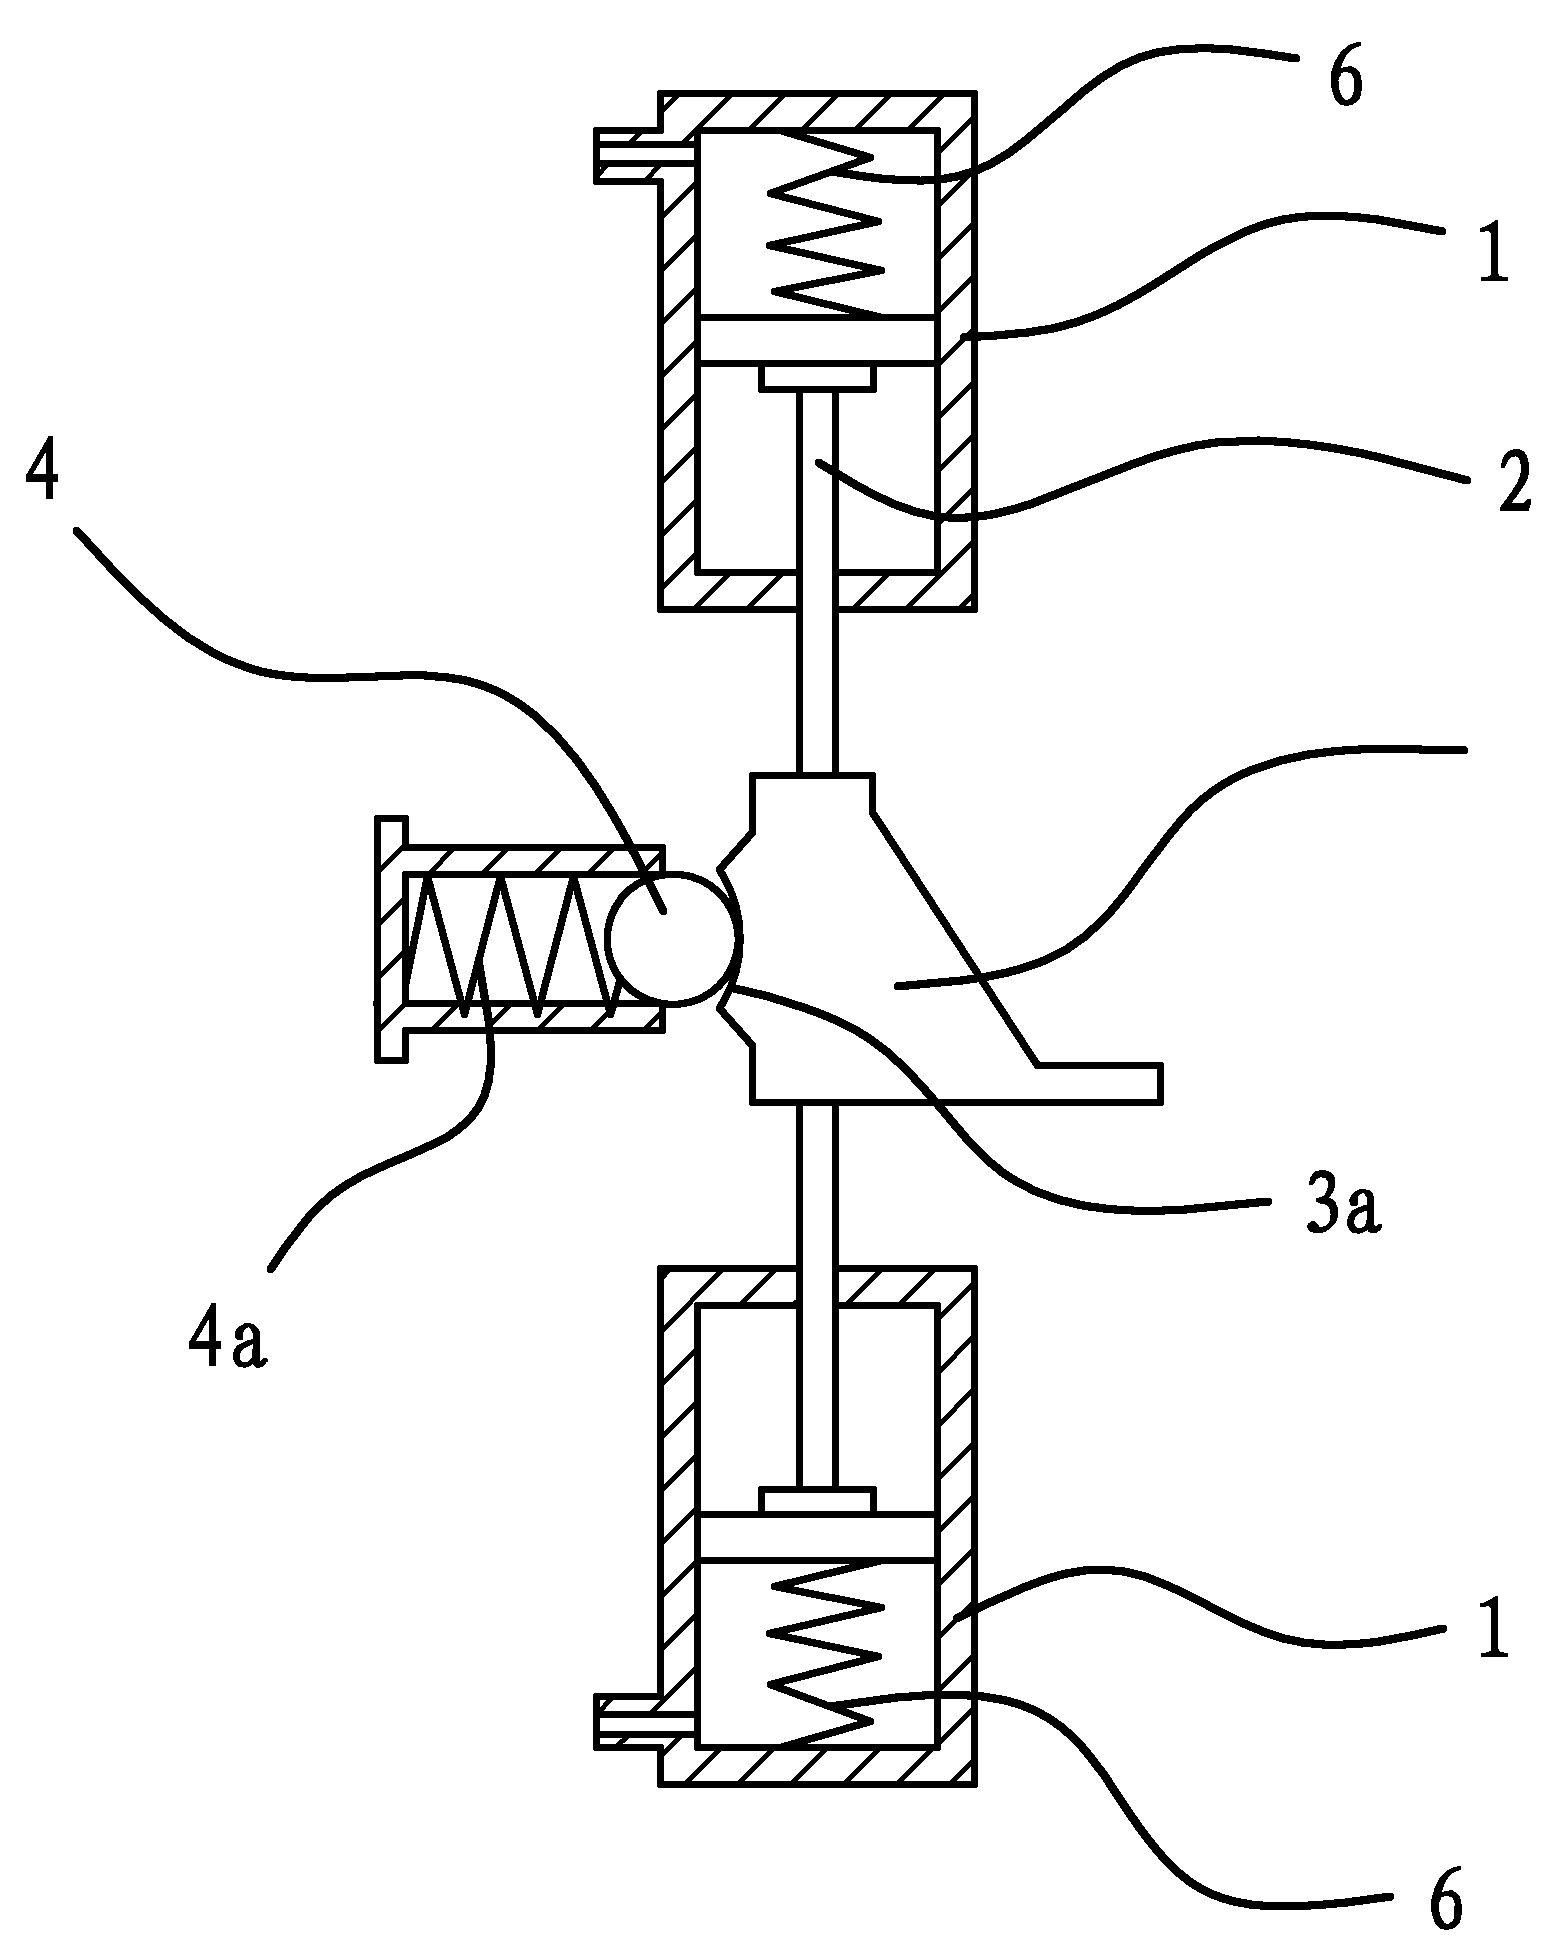 A gear selection actuator of an electronically controlled mechanical automatic transmission